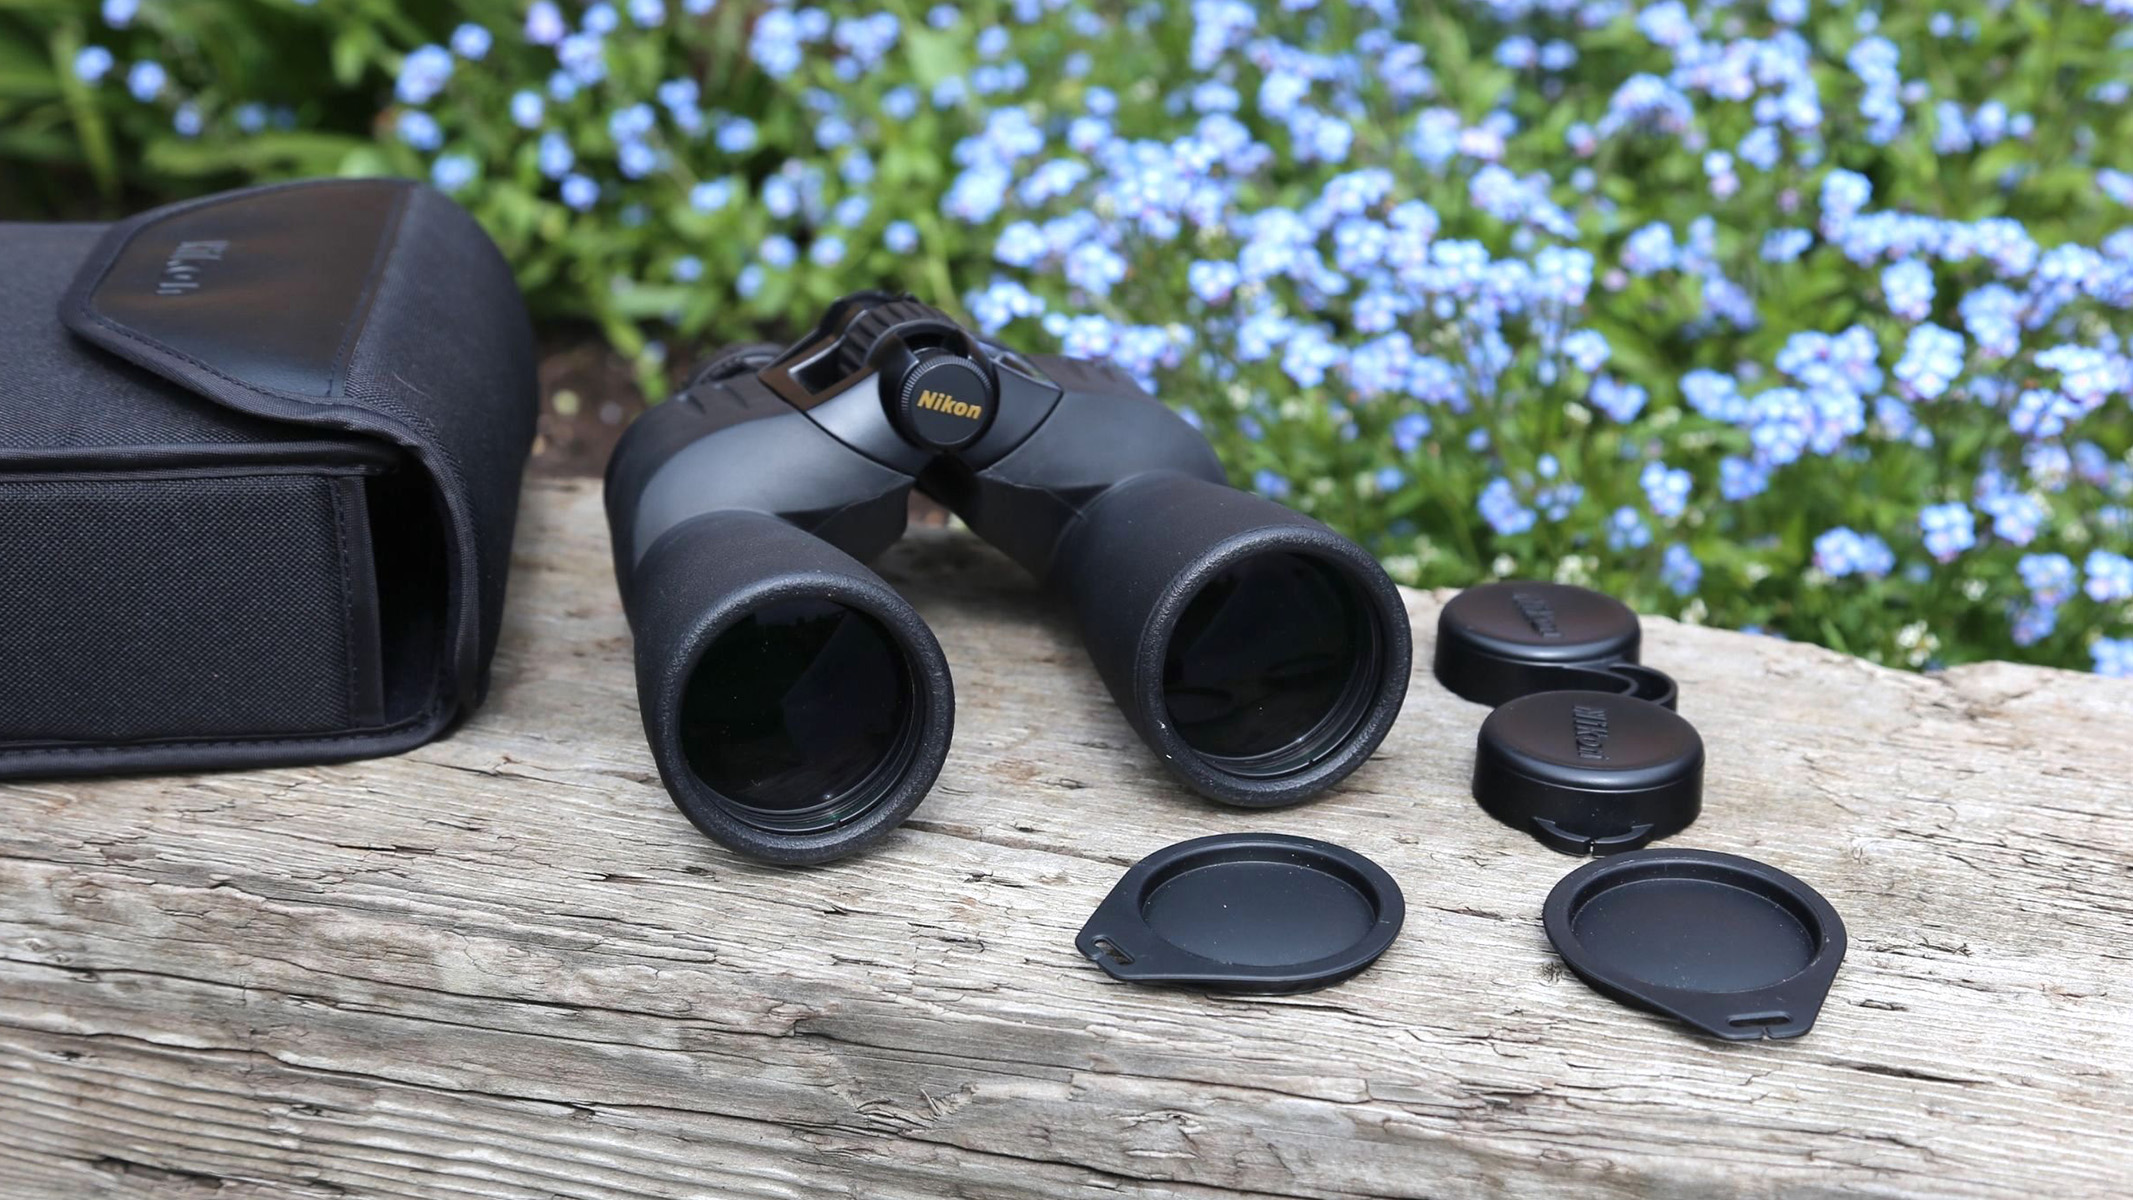 Image shows everything that is included with the Nikon Action EX 12x 50 binoculars. The package contains a padded bag, two pop-off objective lens caps and a rainguard.